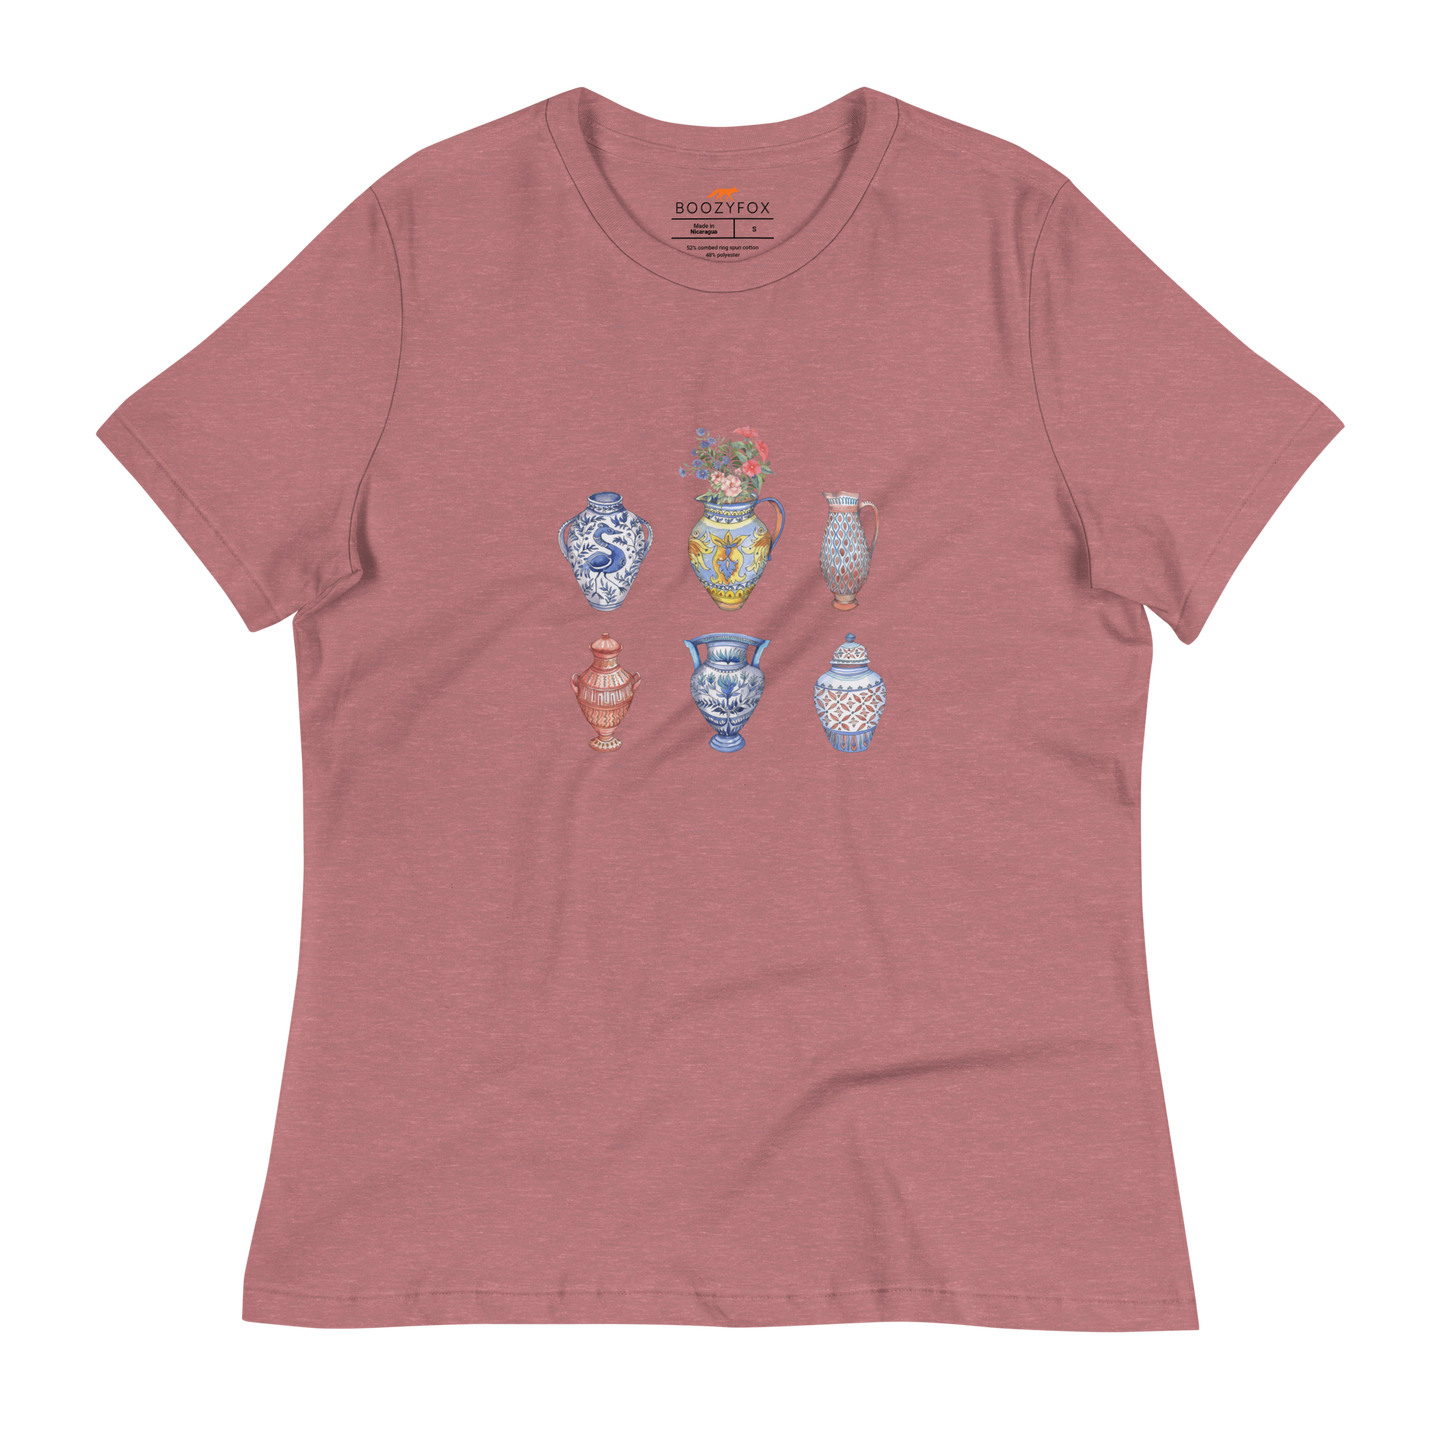 Women's relaxed heather mauve Vase t-shirt featuring a chic vase graphic on the chest - Women's Artsy Graphic Vase Tees - Boozy Fox